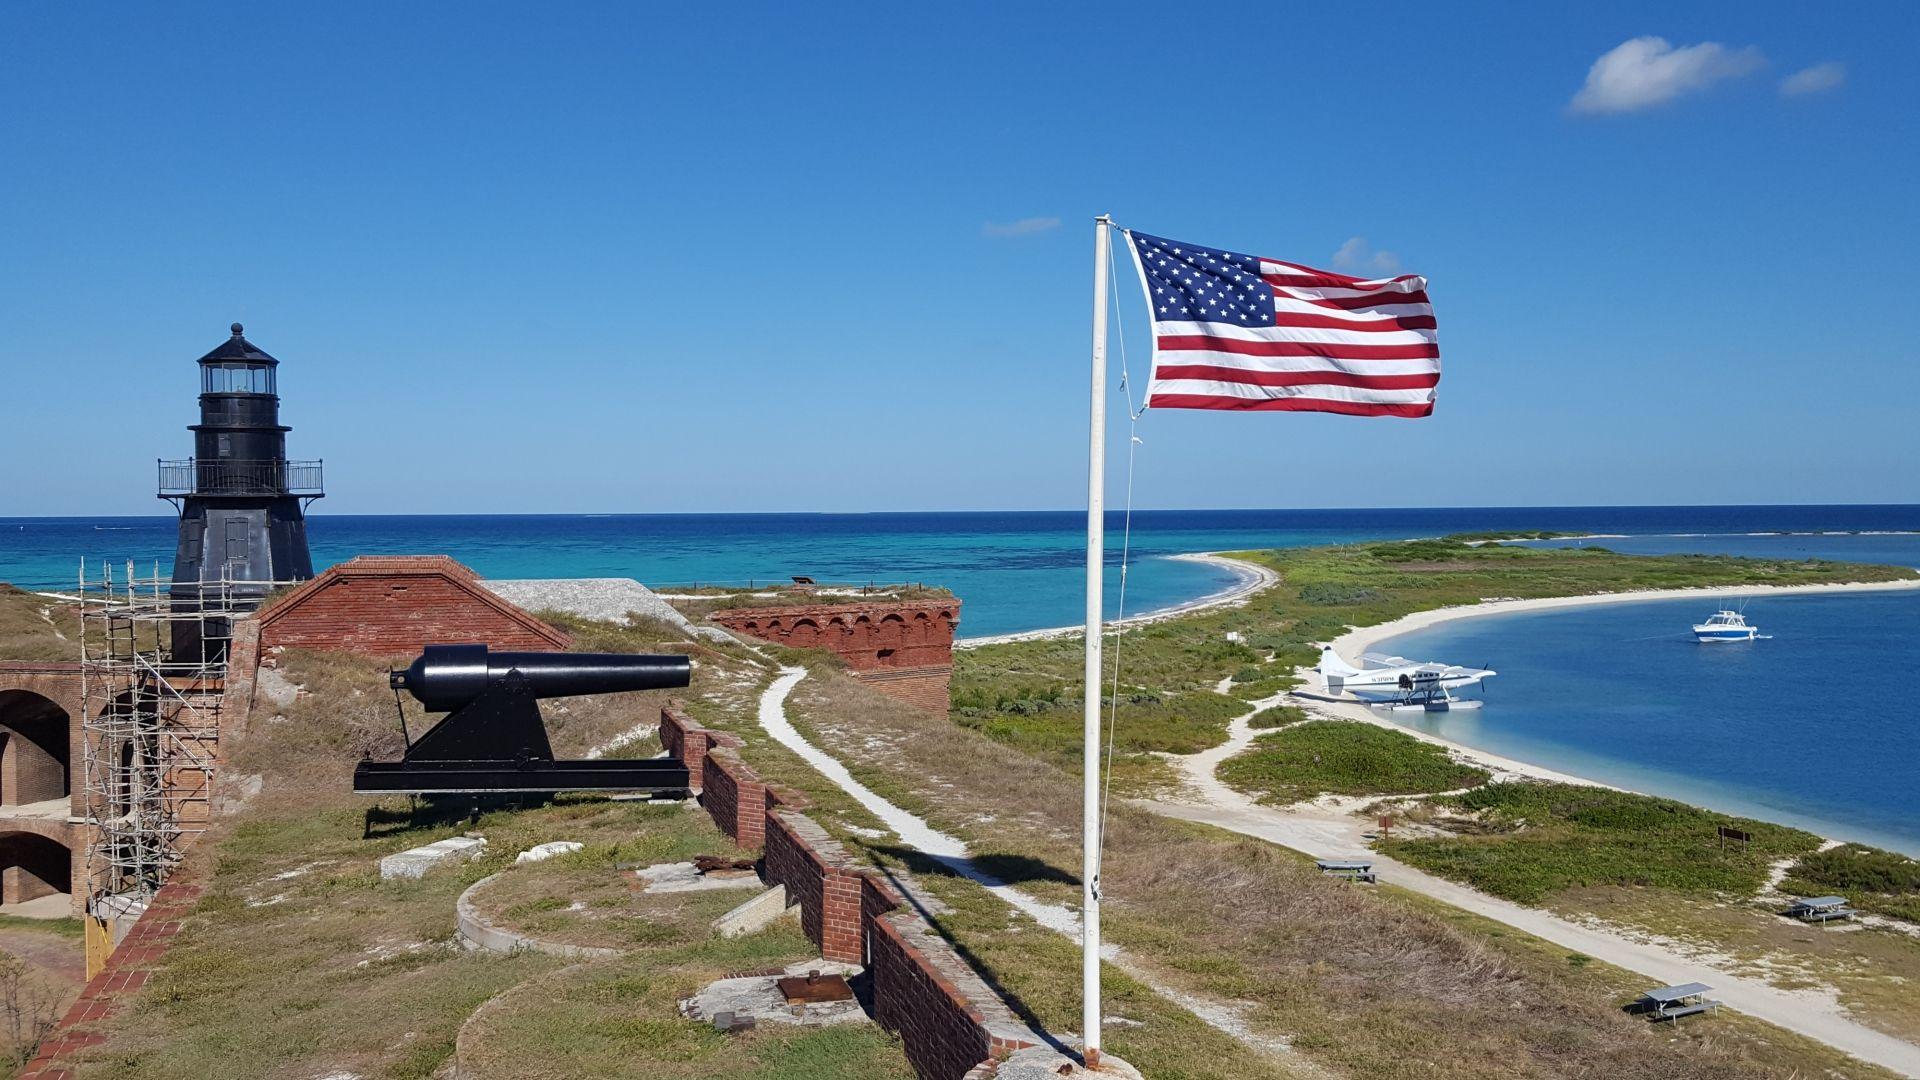 Remote Camping at Dry Tortugas National Park. National Park